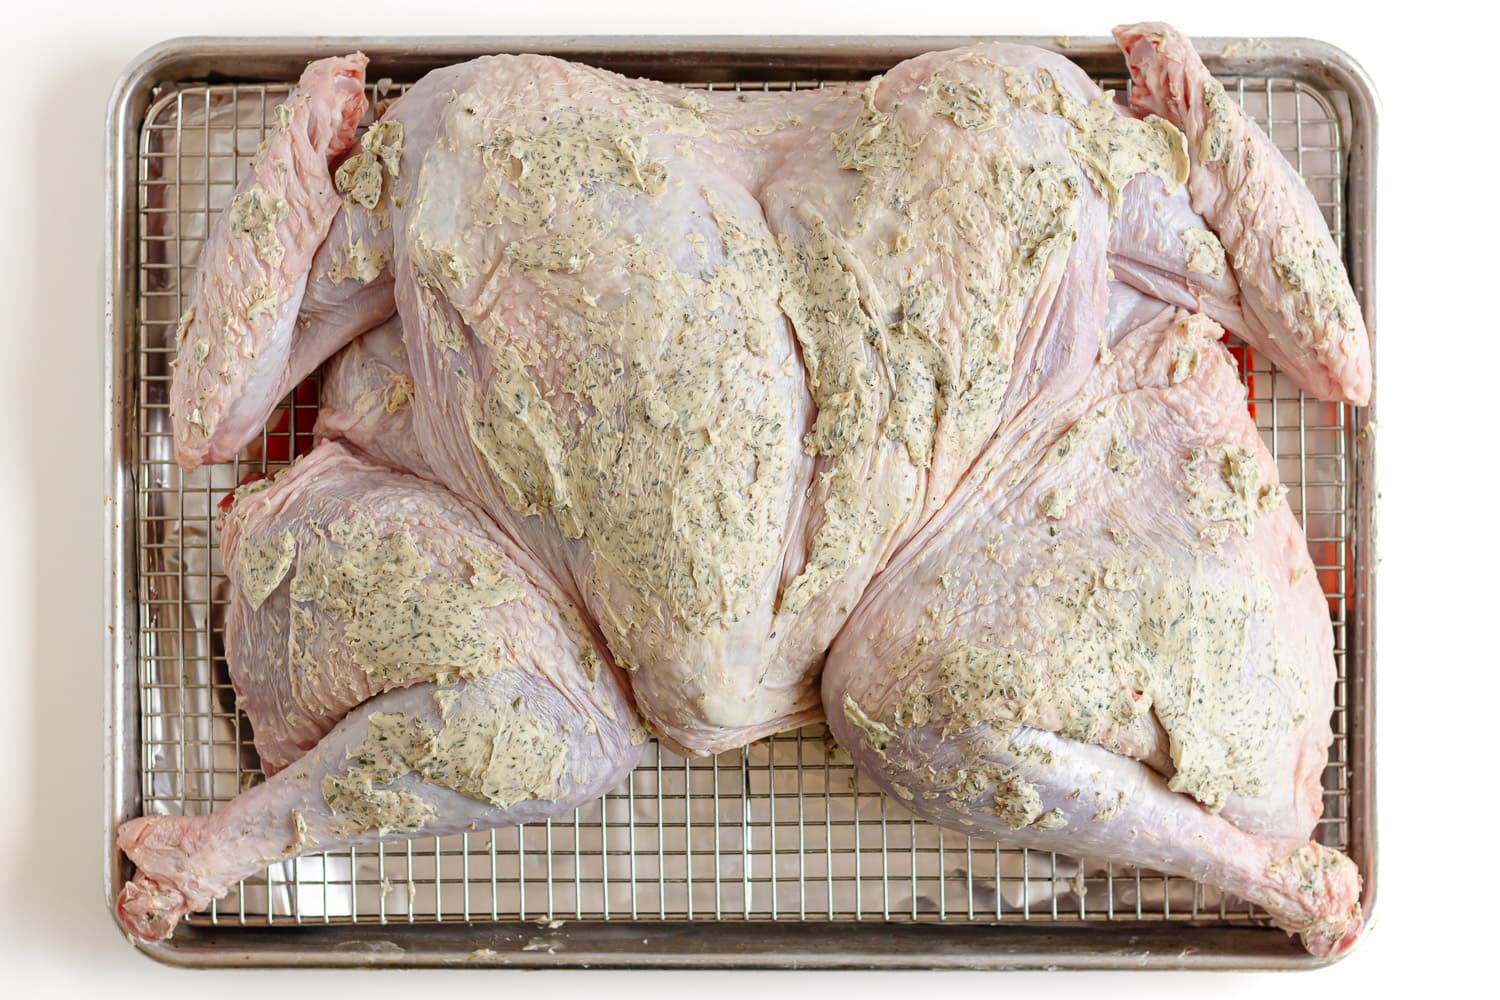 Herb butter slathered on a raw spatchcock turkey on a baking sheet.